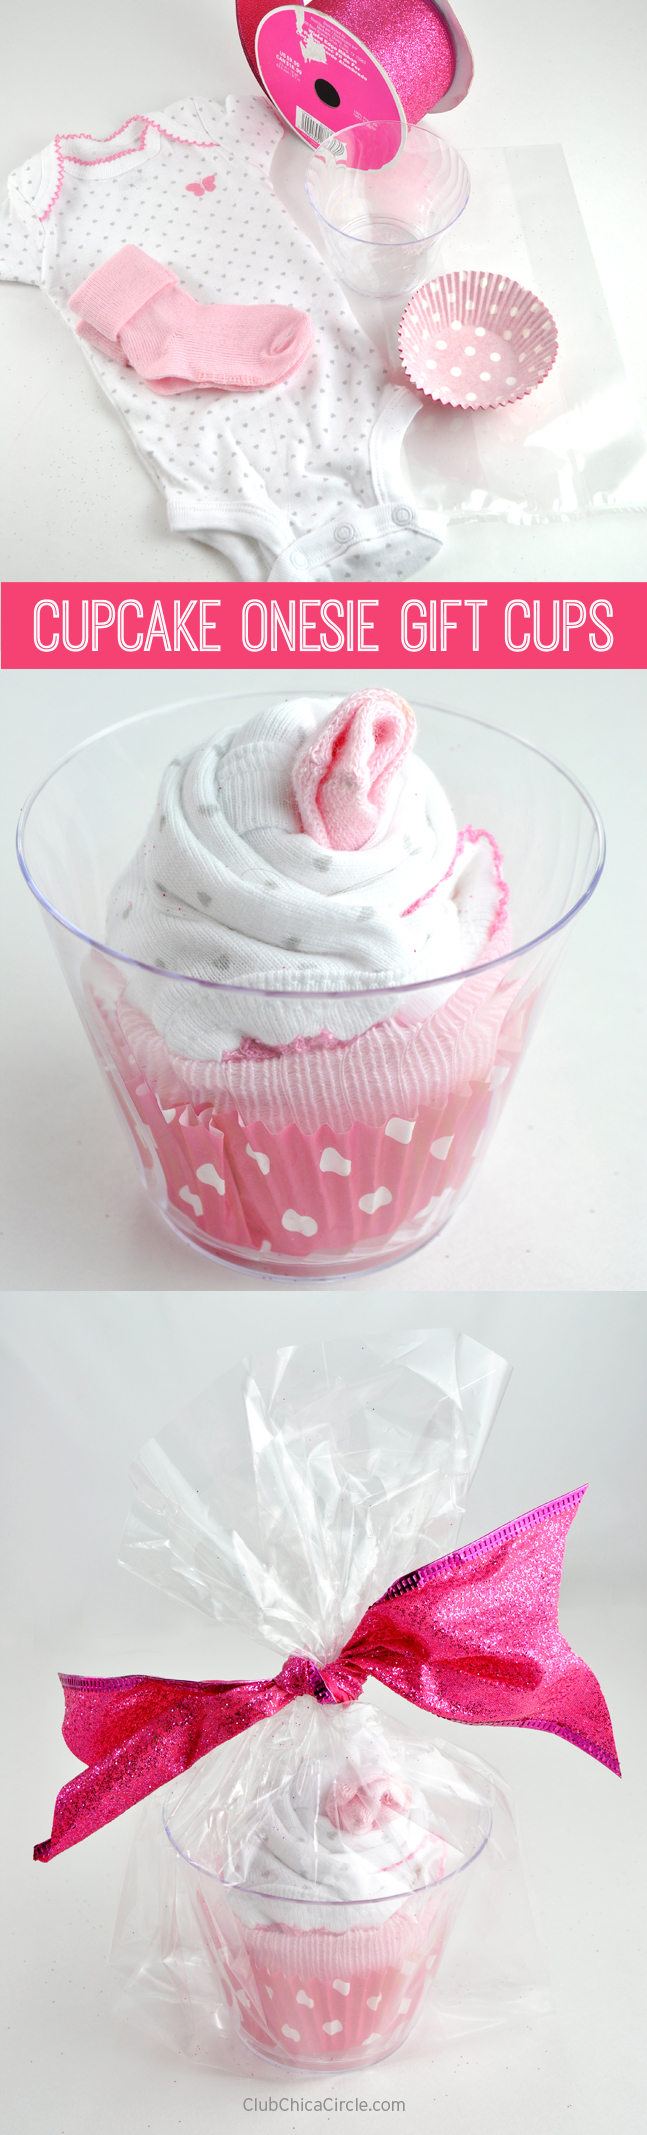 cupcake onesie gift cups @clubchicacircle